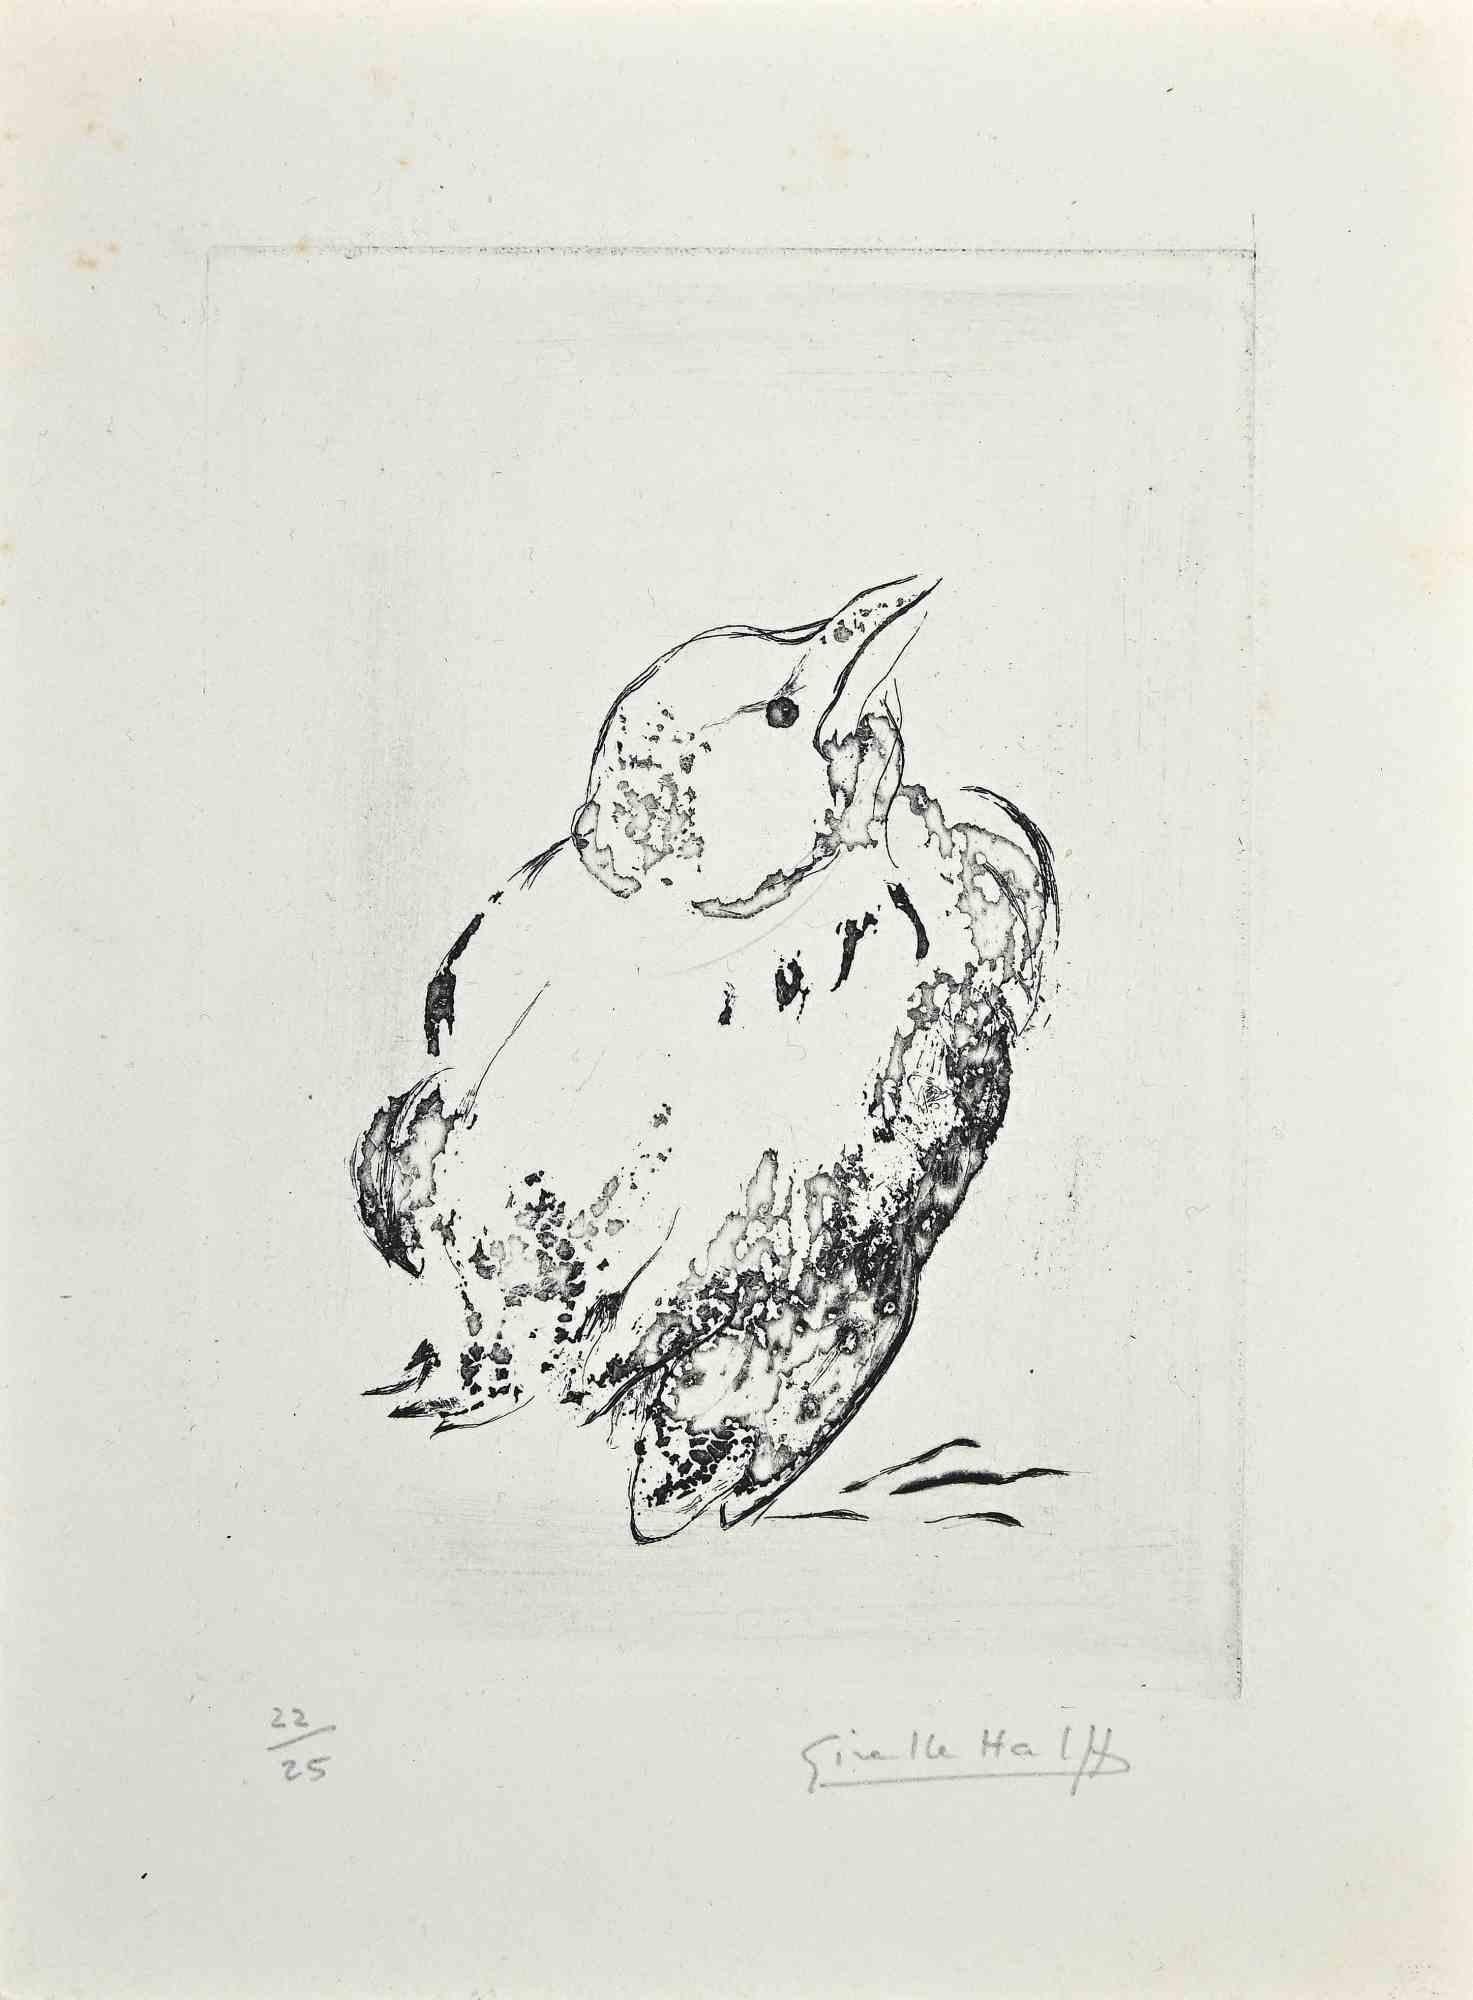 Pigeon - Original Etching by Giselle Hallf - Mid-20th Century